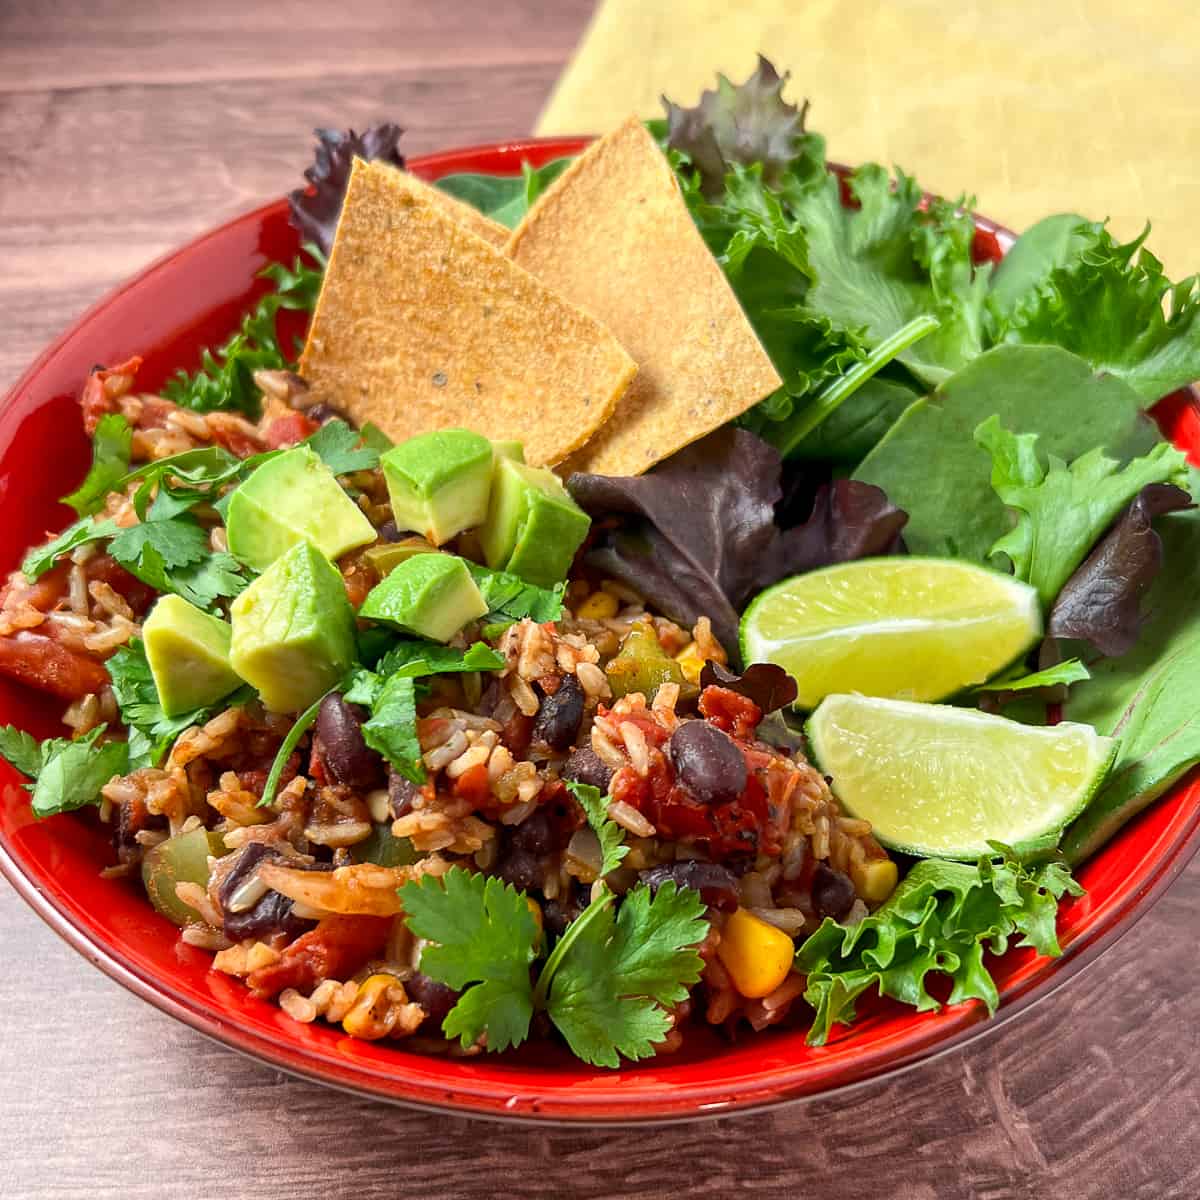 top view close up of Mexican Rice Casserole in a bowl topped with diced avocado, fresh cilantro, lime, oven-baked tortilla chips and side green salad